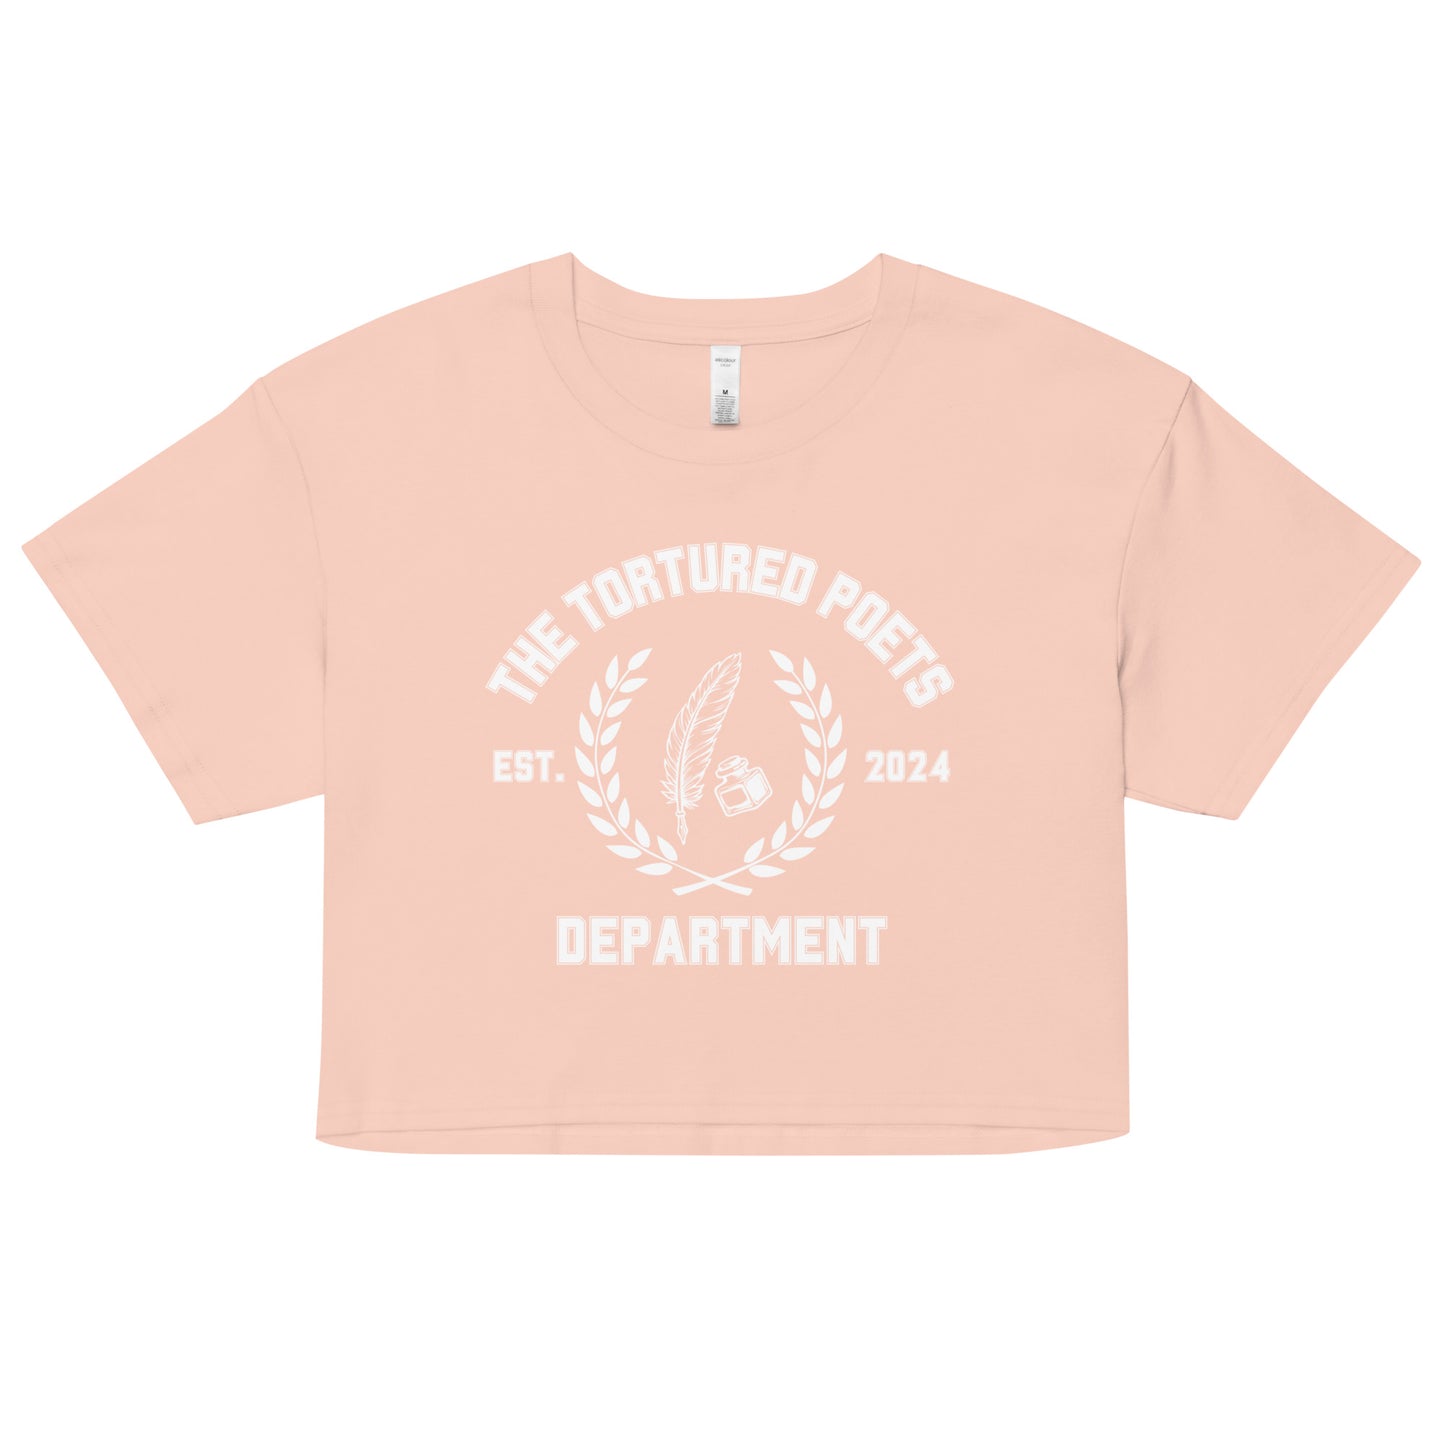 The Tortured Poets Department Cropped Tee, White Print Version | Taylor Crop Top